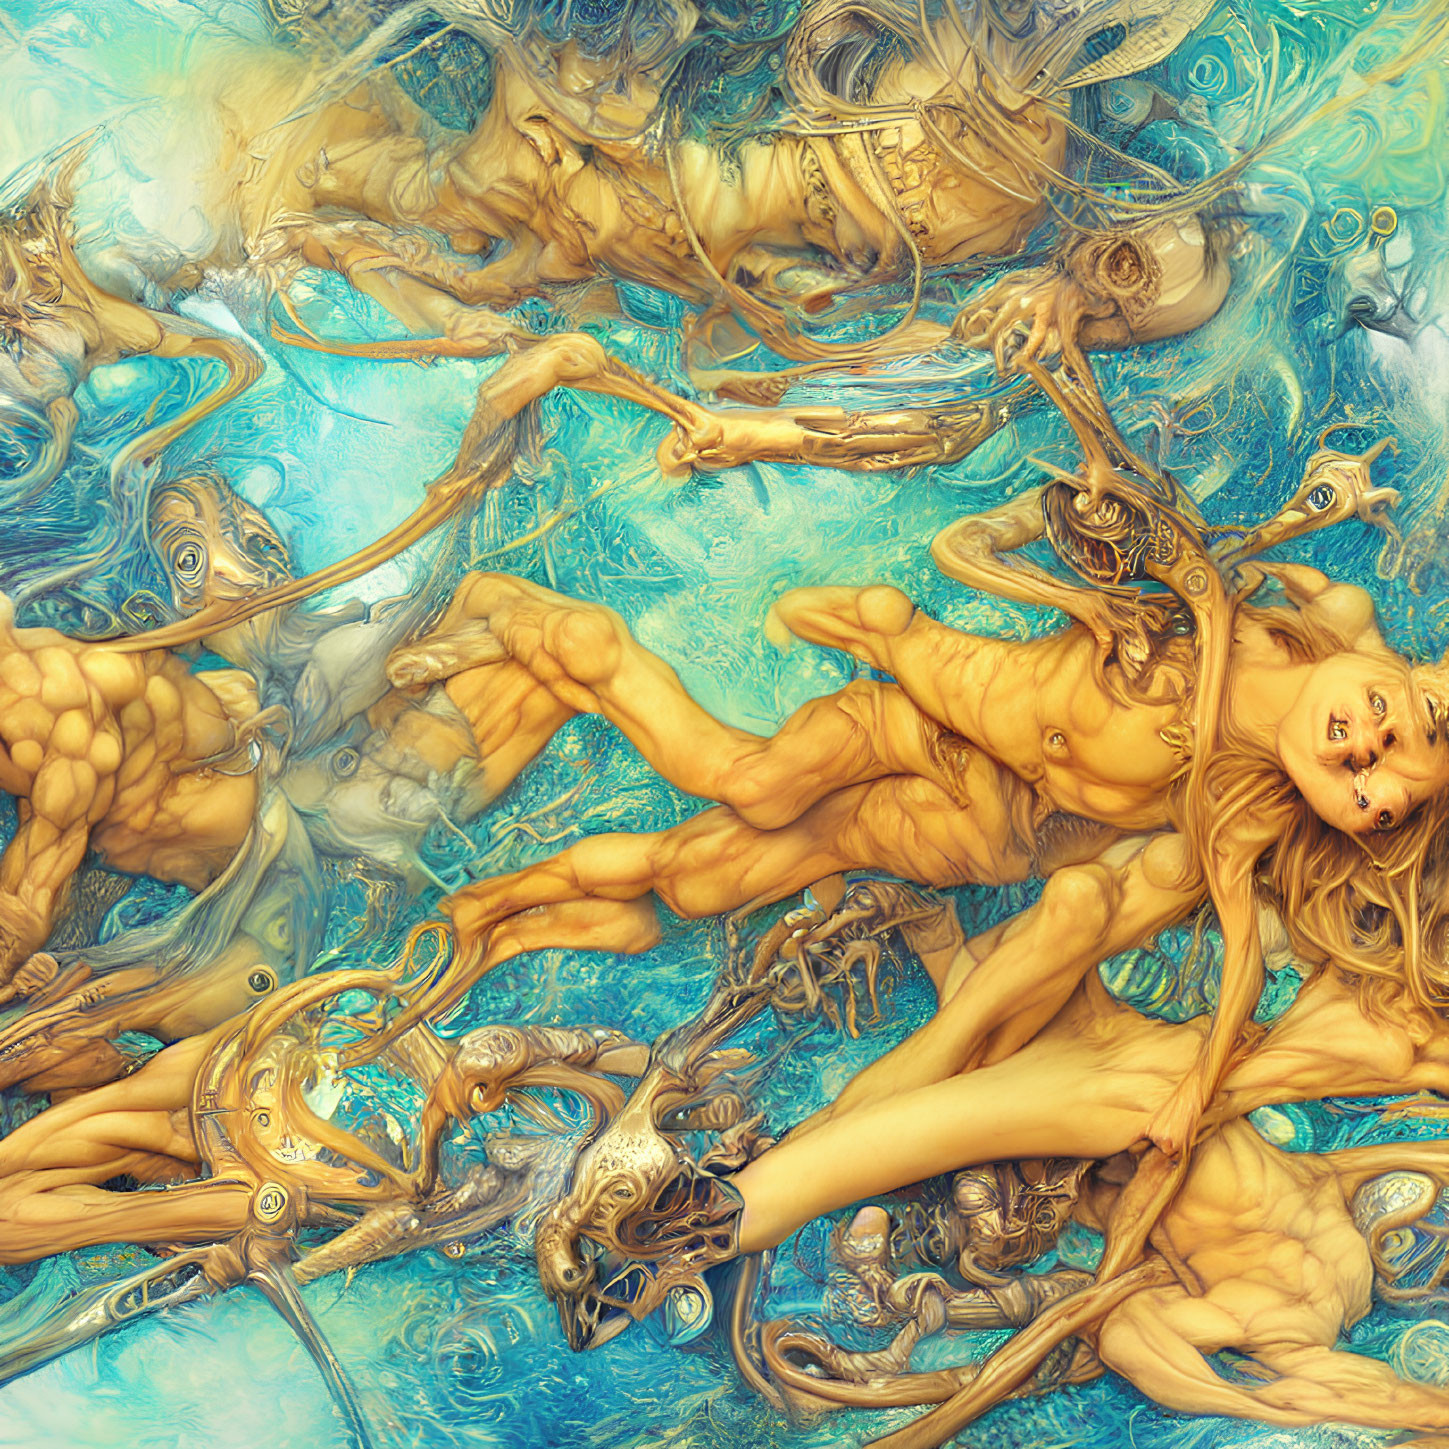 Surreal Artwork: Intertwined Human and Mechanical Figures in Golden and Blue Palette